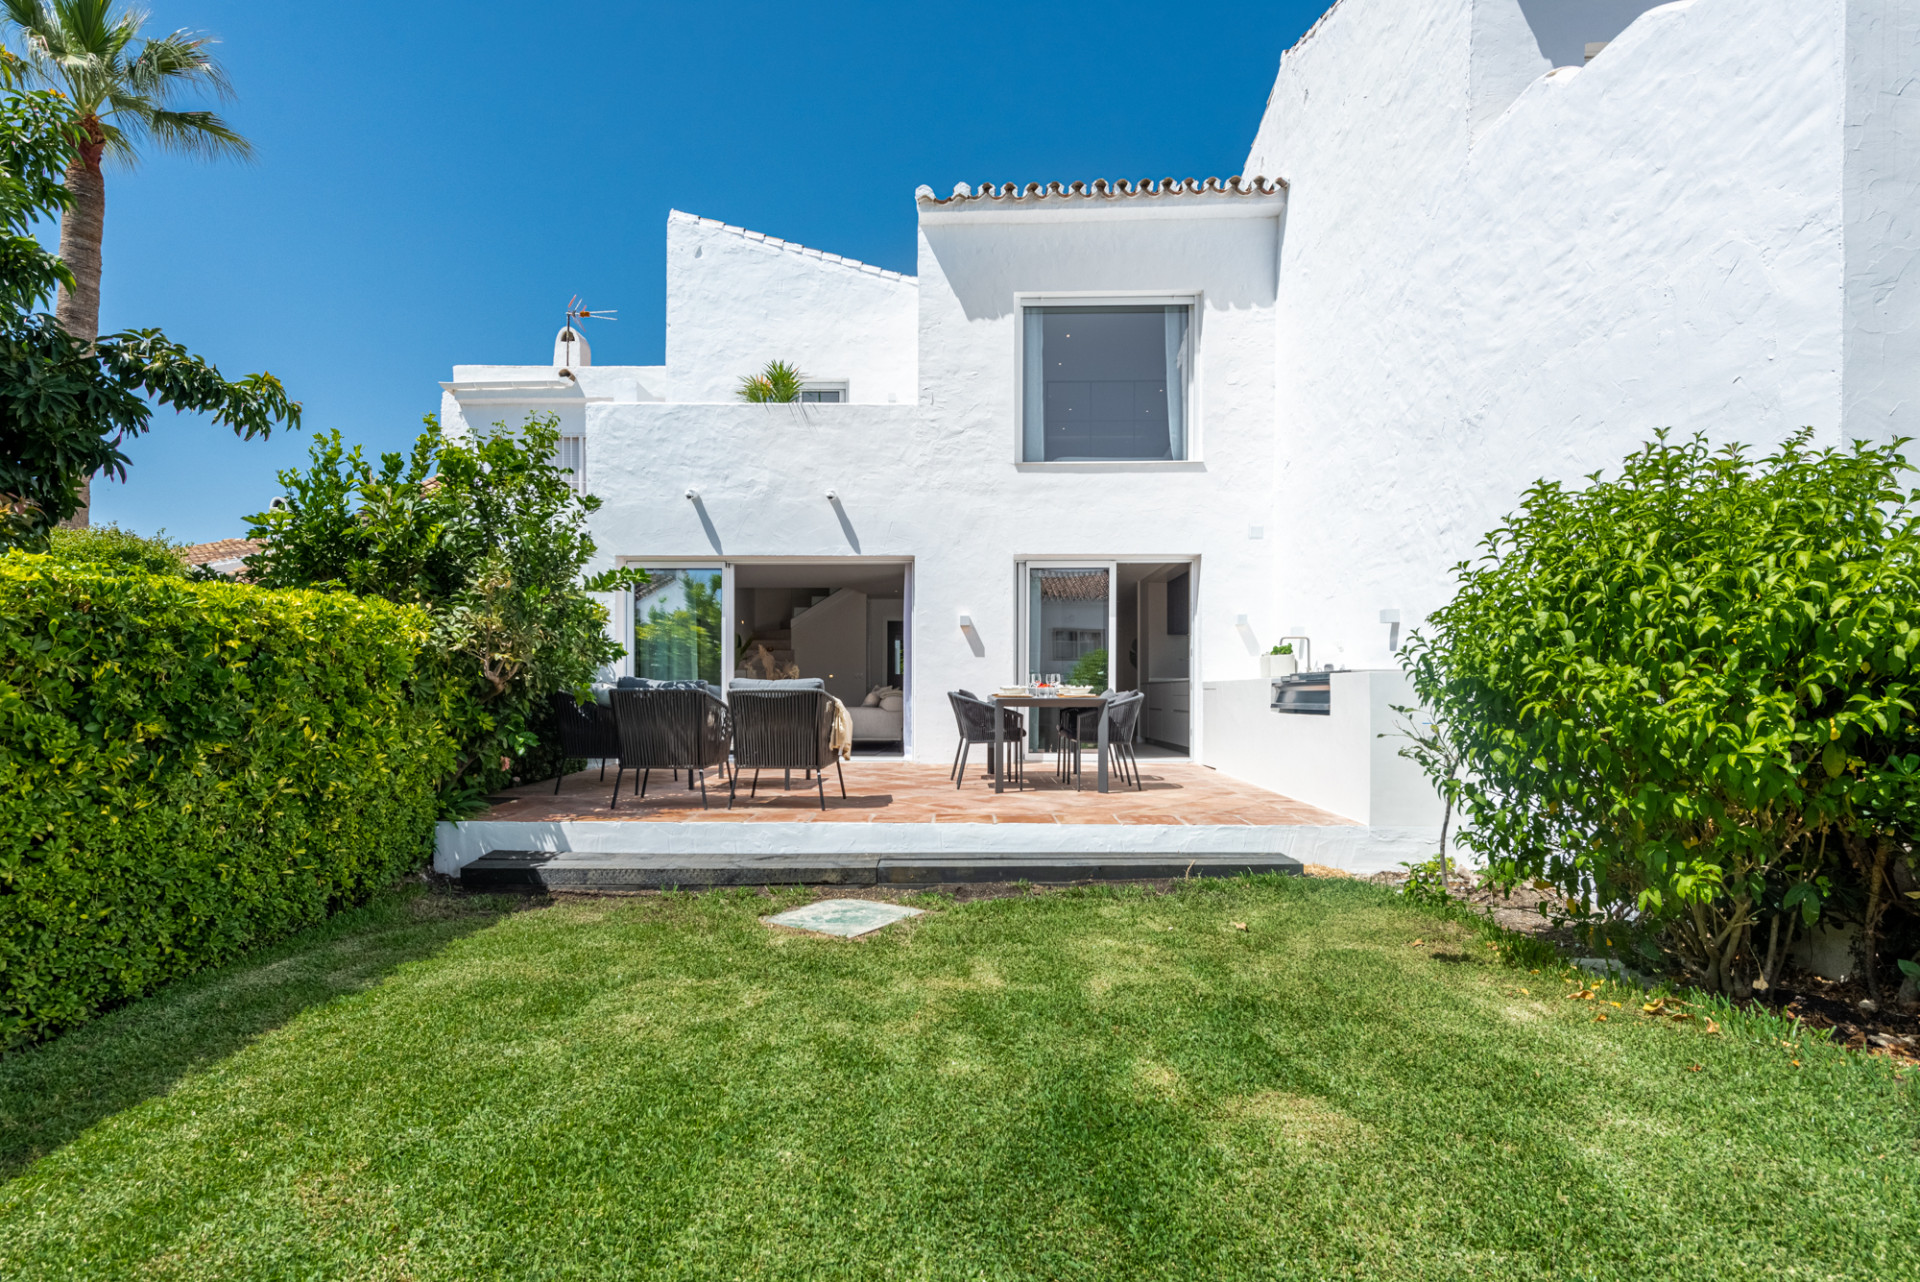 If you’ve dreamed of a home in the Spanish sunshine, offering space, style and serene surrounds, have a look at this townhouse in Aloha